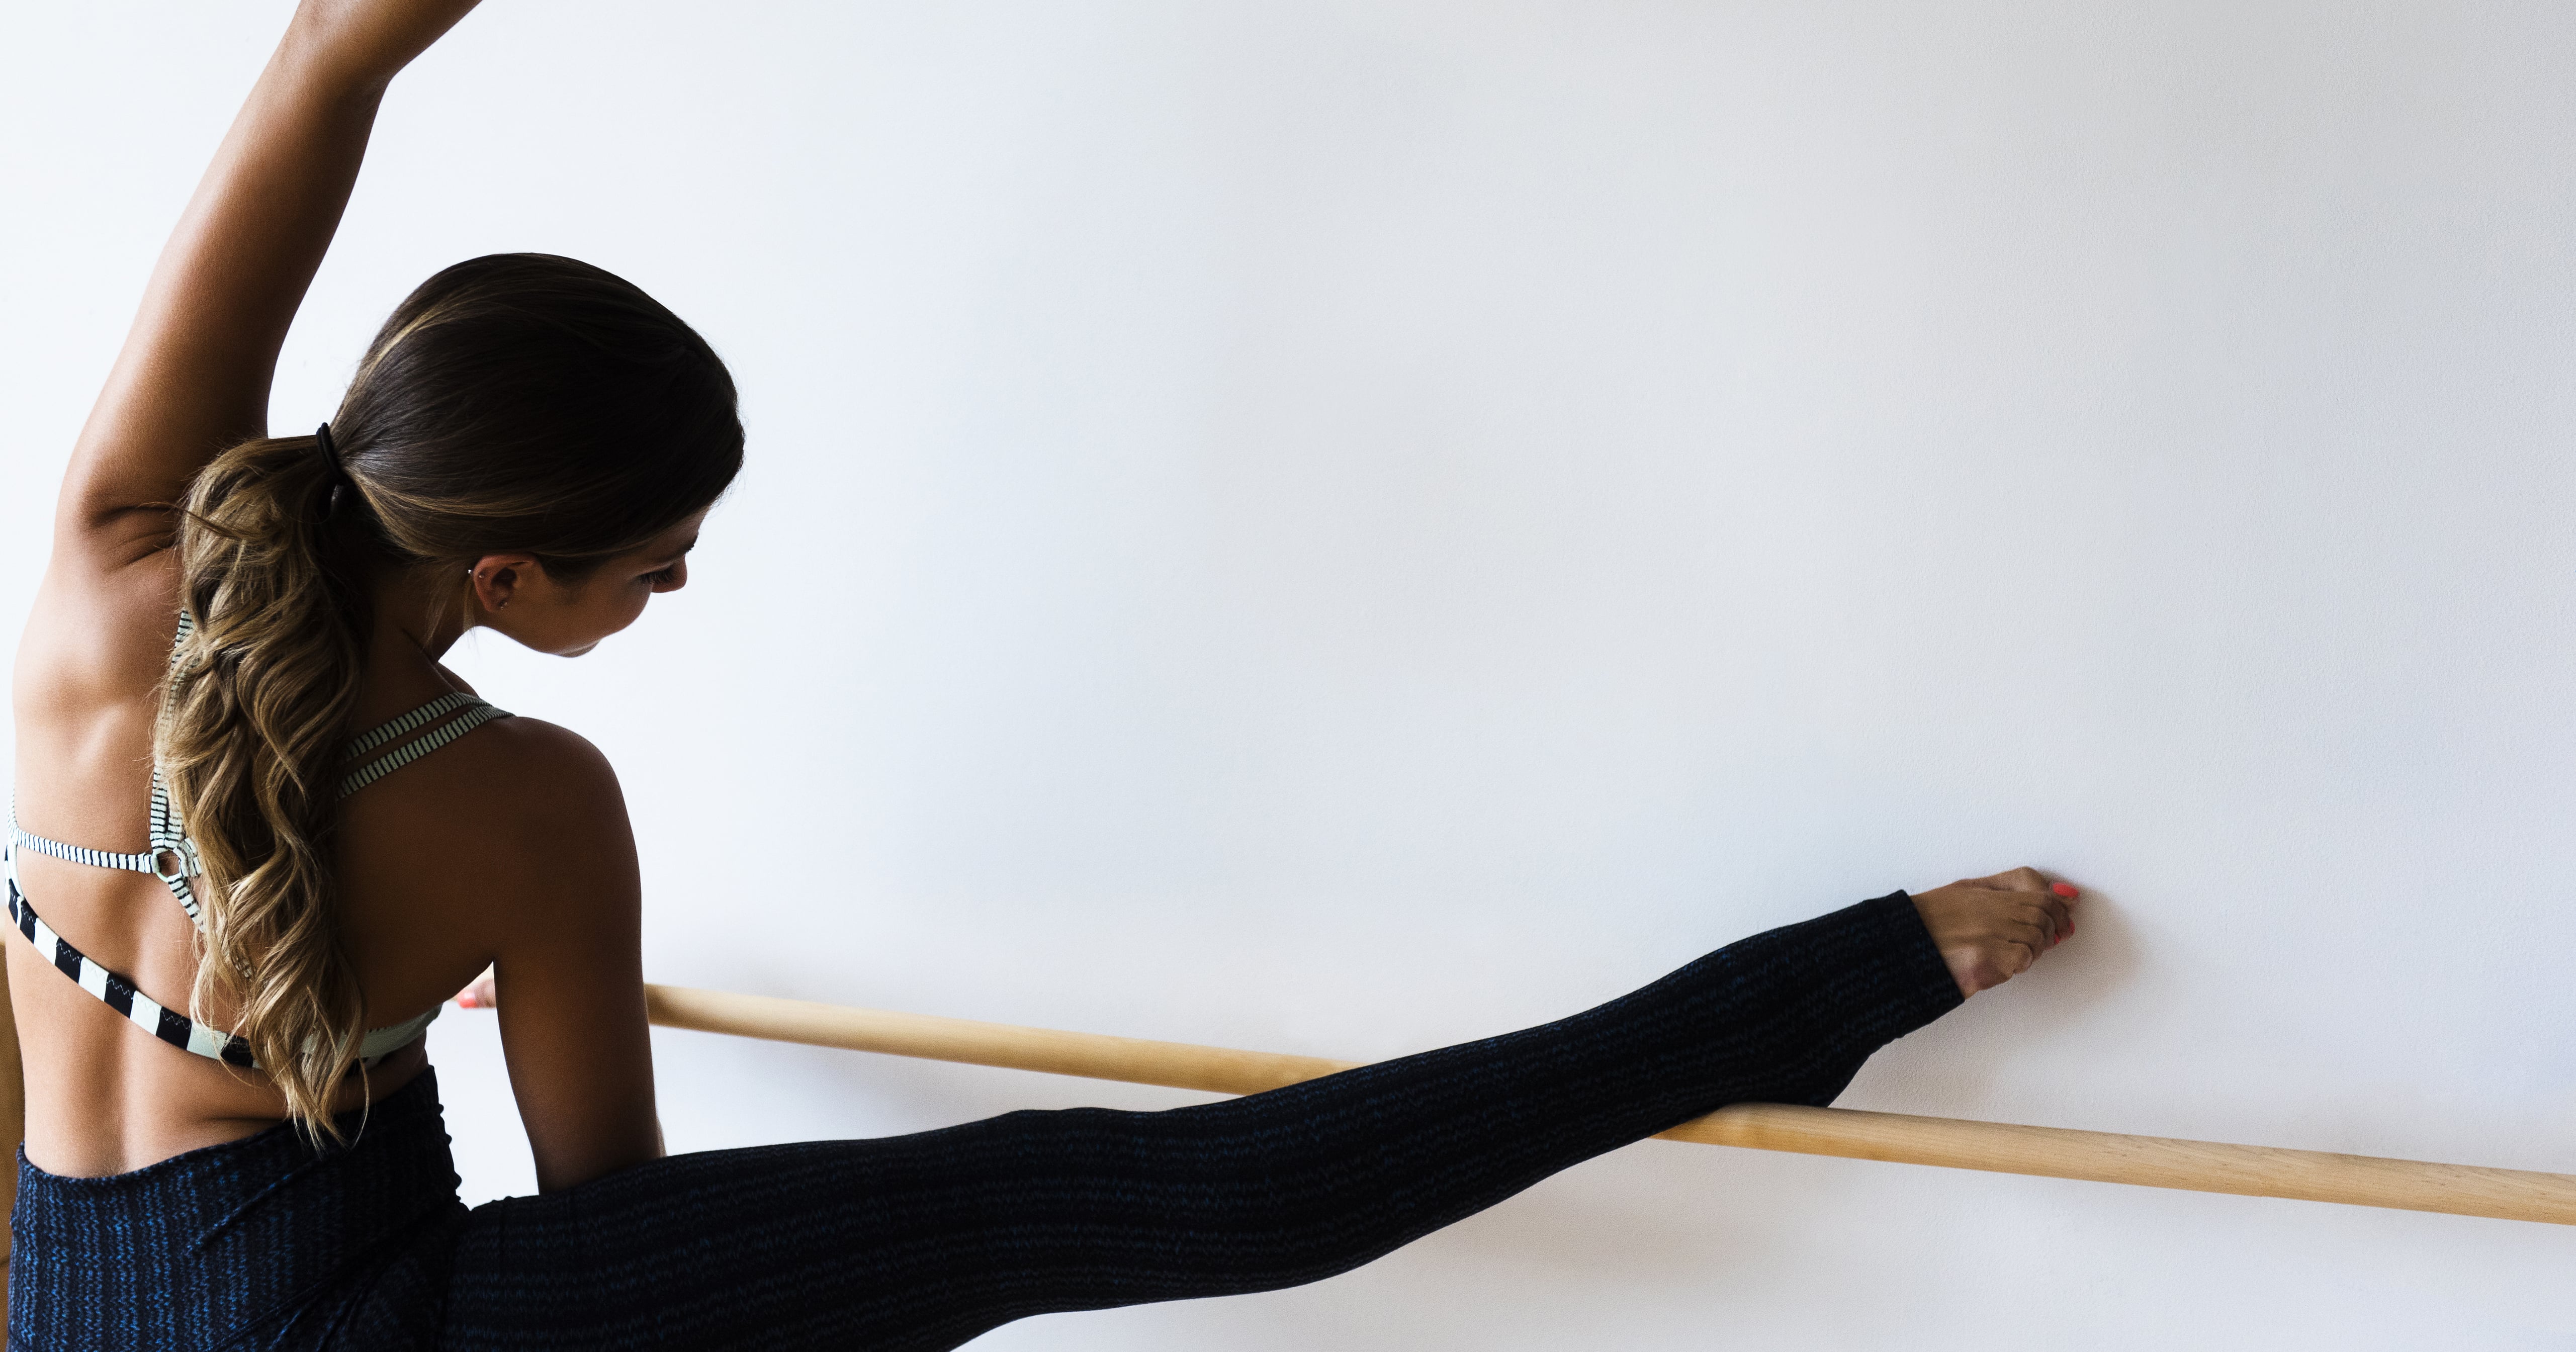 Does Barre Build Muscle?